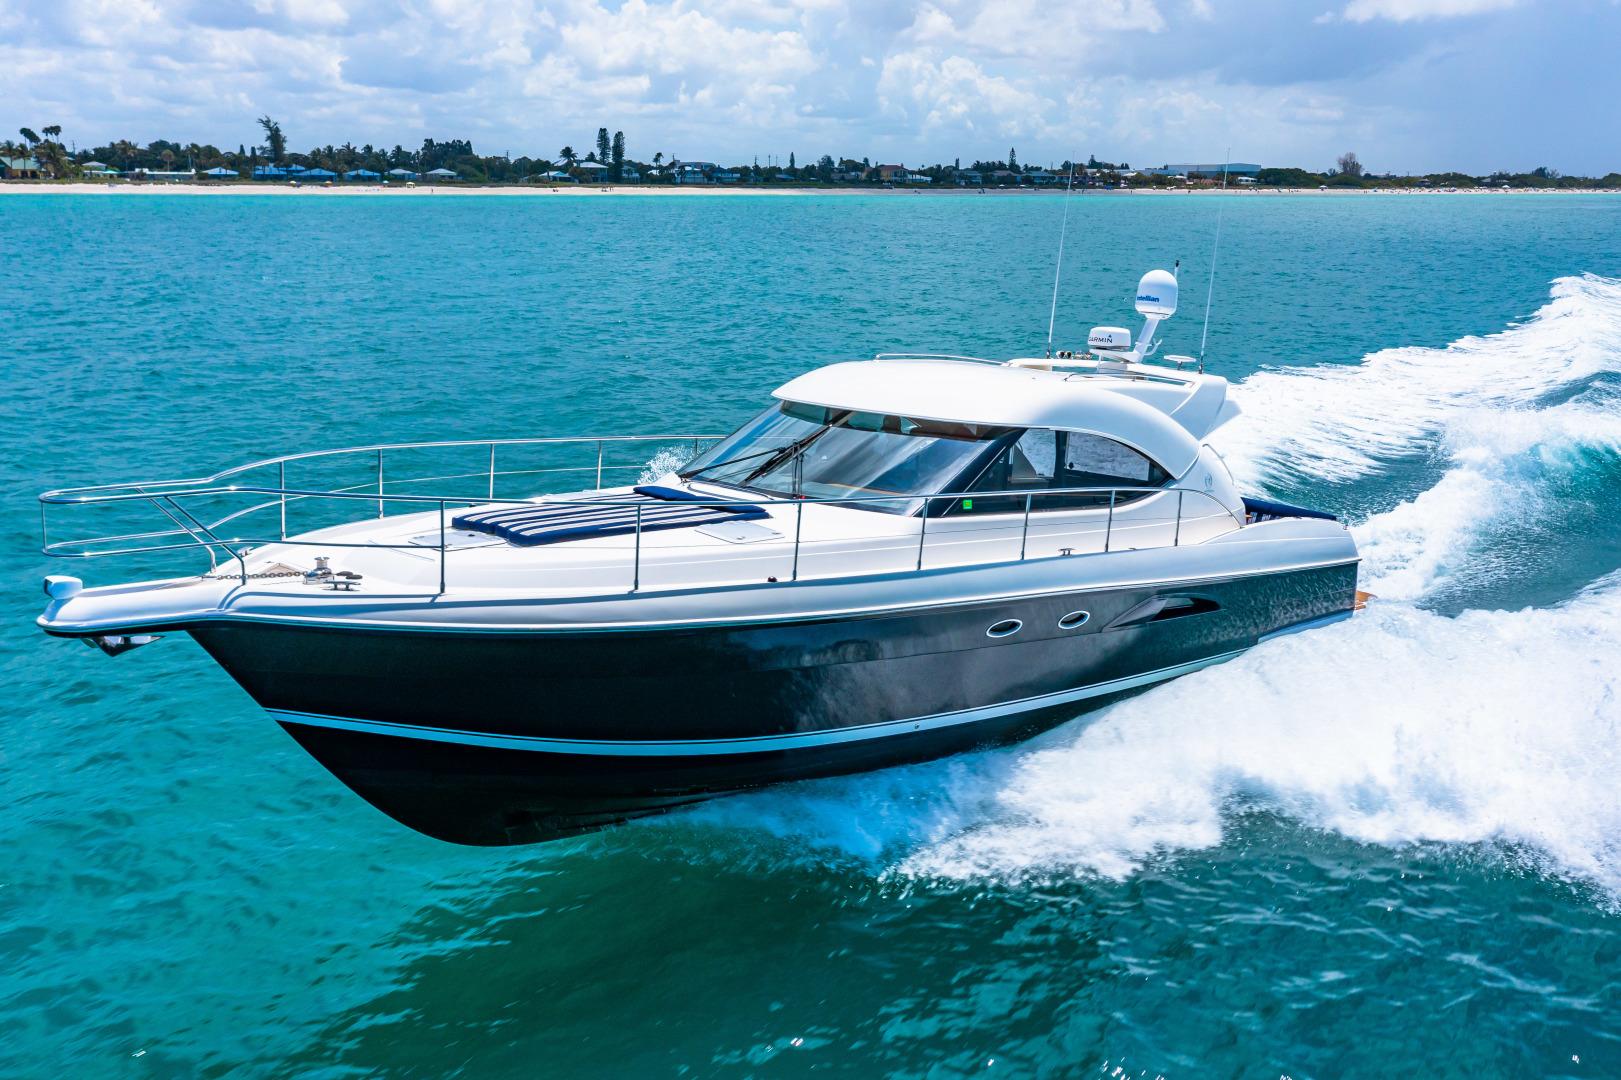 THREE WISHES Yacht for Sale in Sarasota | 54' 9